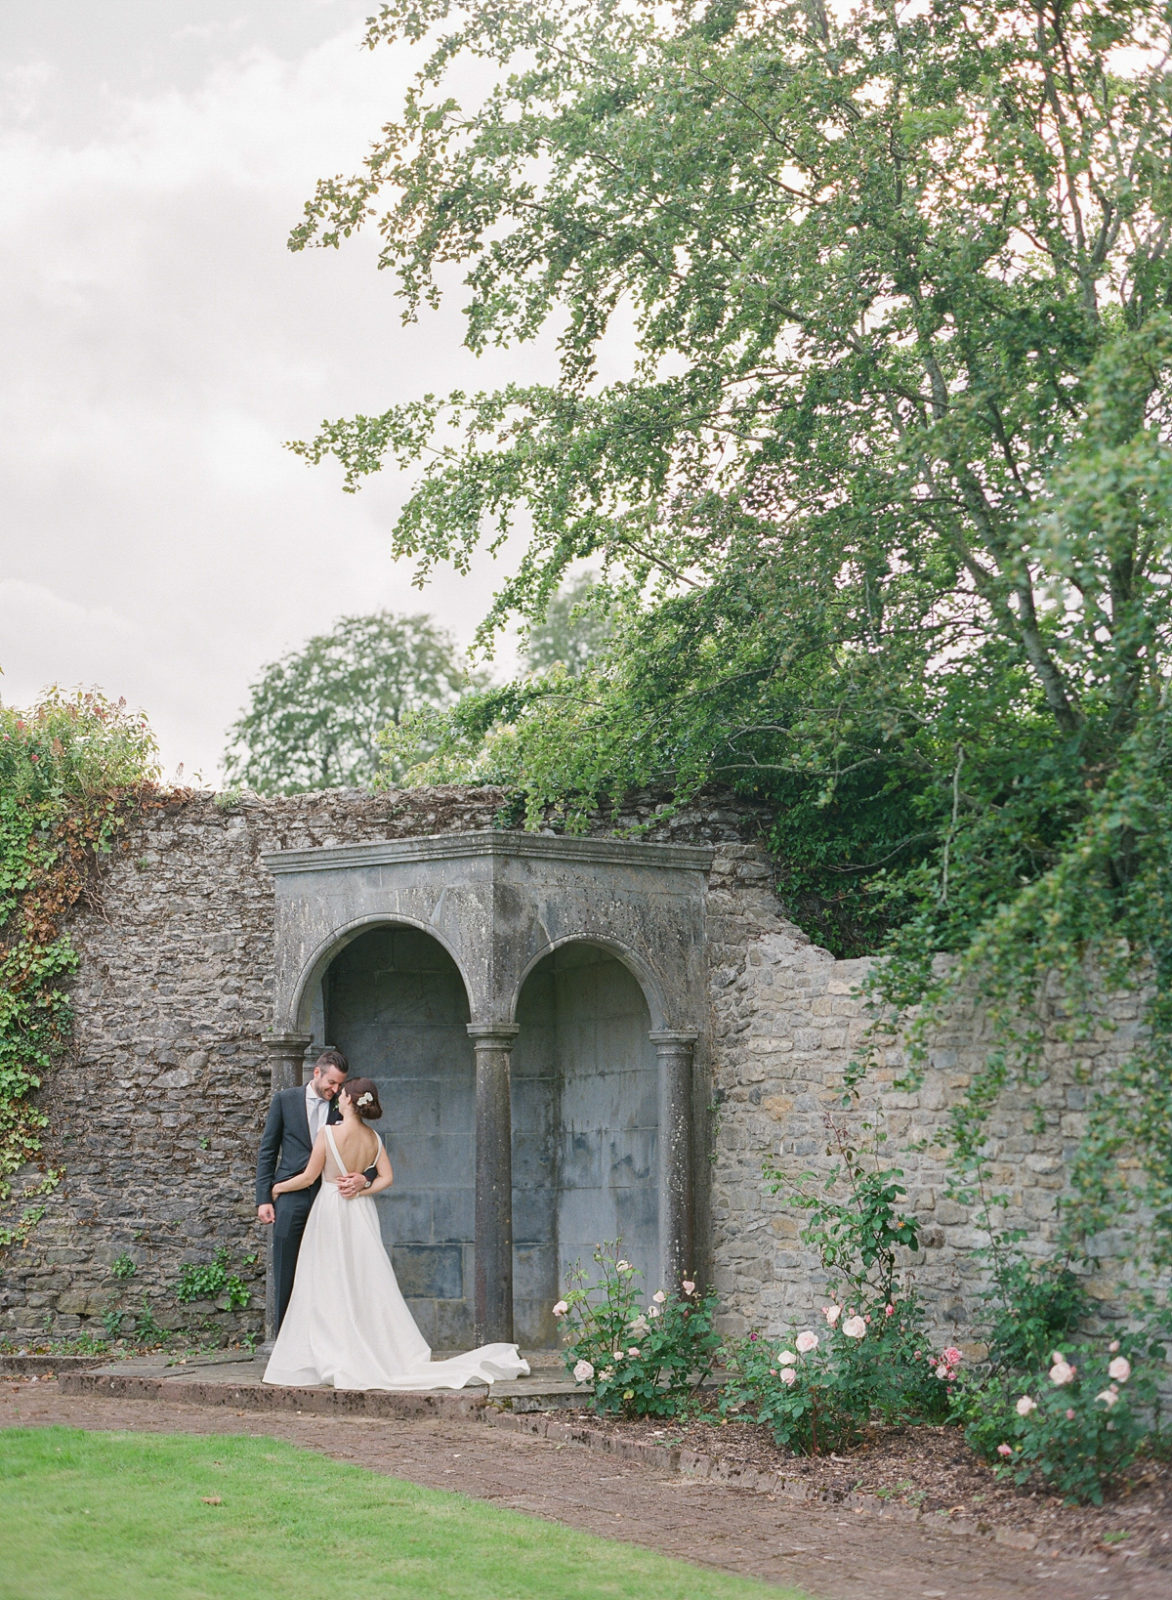 Ireland Film Photographer | Molly Carr Photography | Bride in White Jenny Yoo Wedding Dress and Groom in Grey Suit Kissing in Mount Juliet Estate Walled Irish Garden